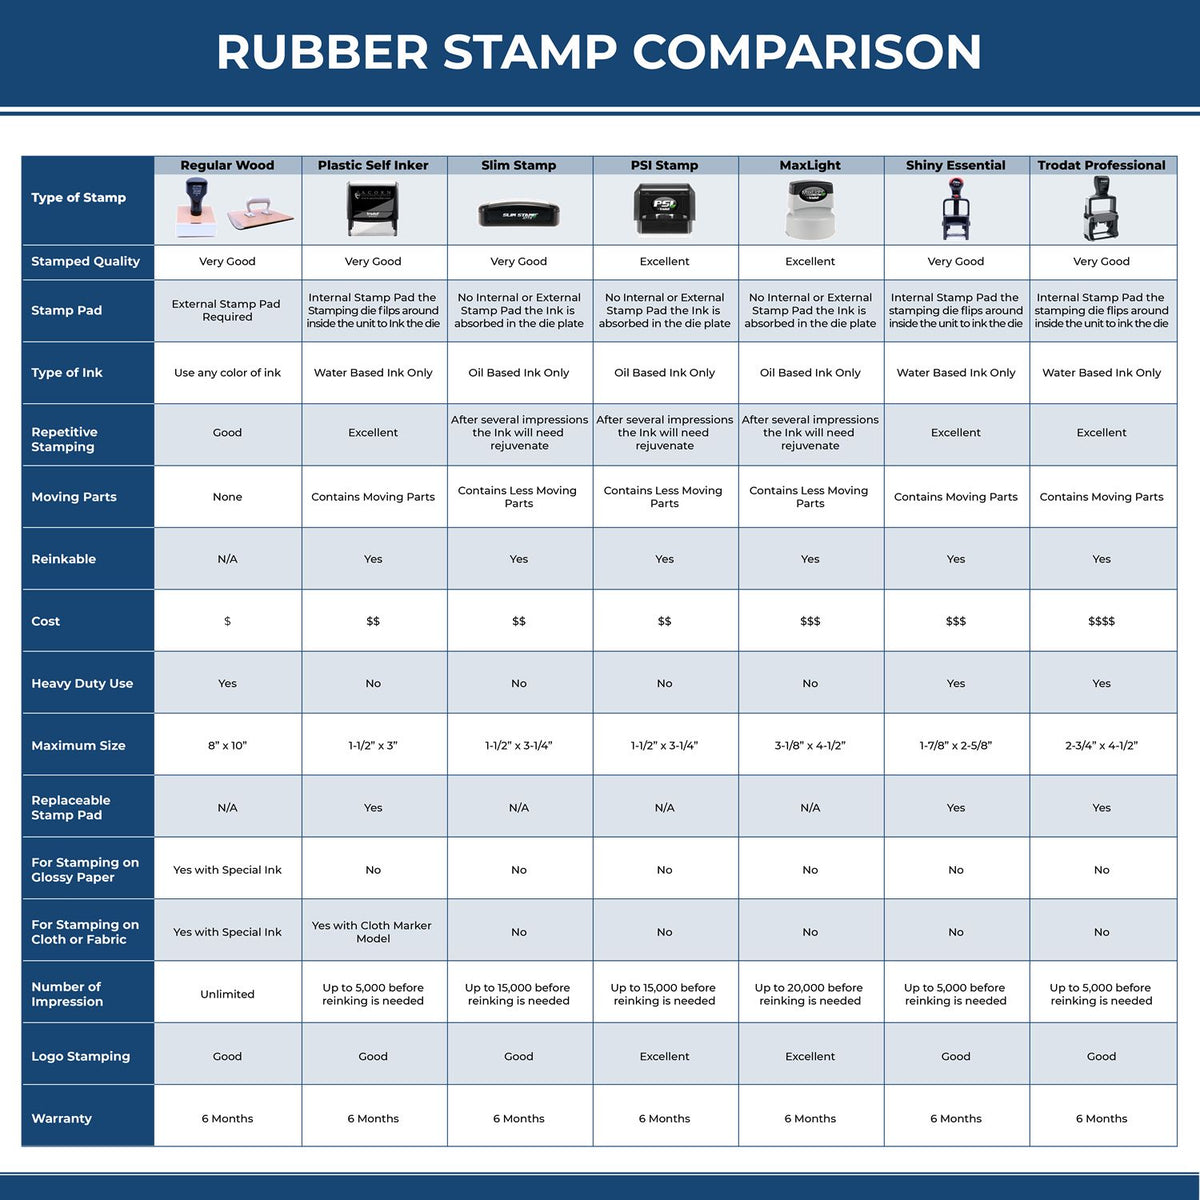 A comparison chart for the different types of mount models available for the Heavy-Duty Idaho Rectangular Notary Stamp.